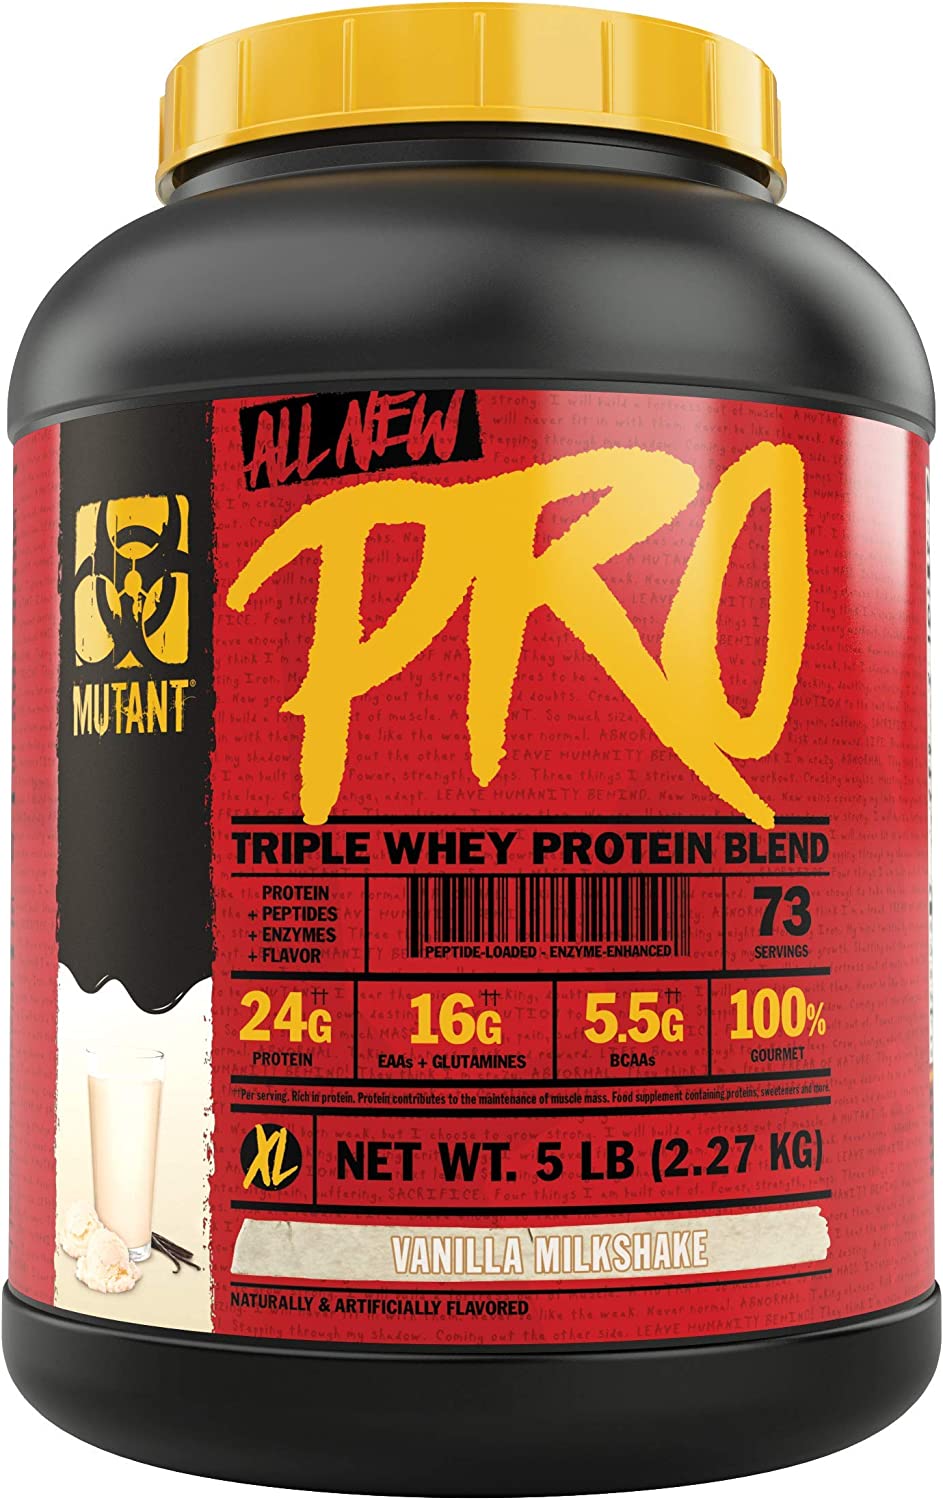 Mutant Pro Triple Whey Protein Blend